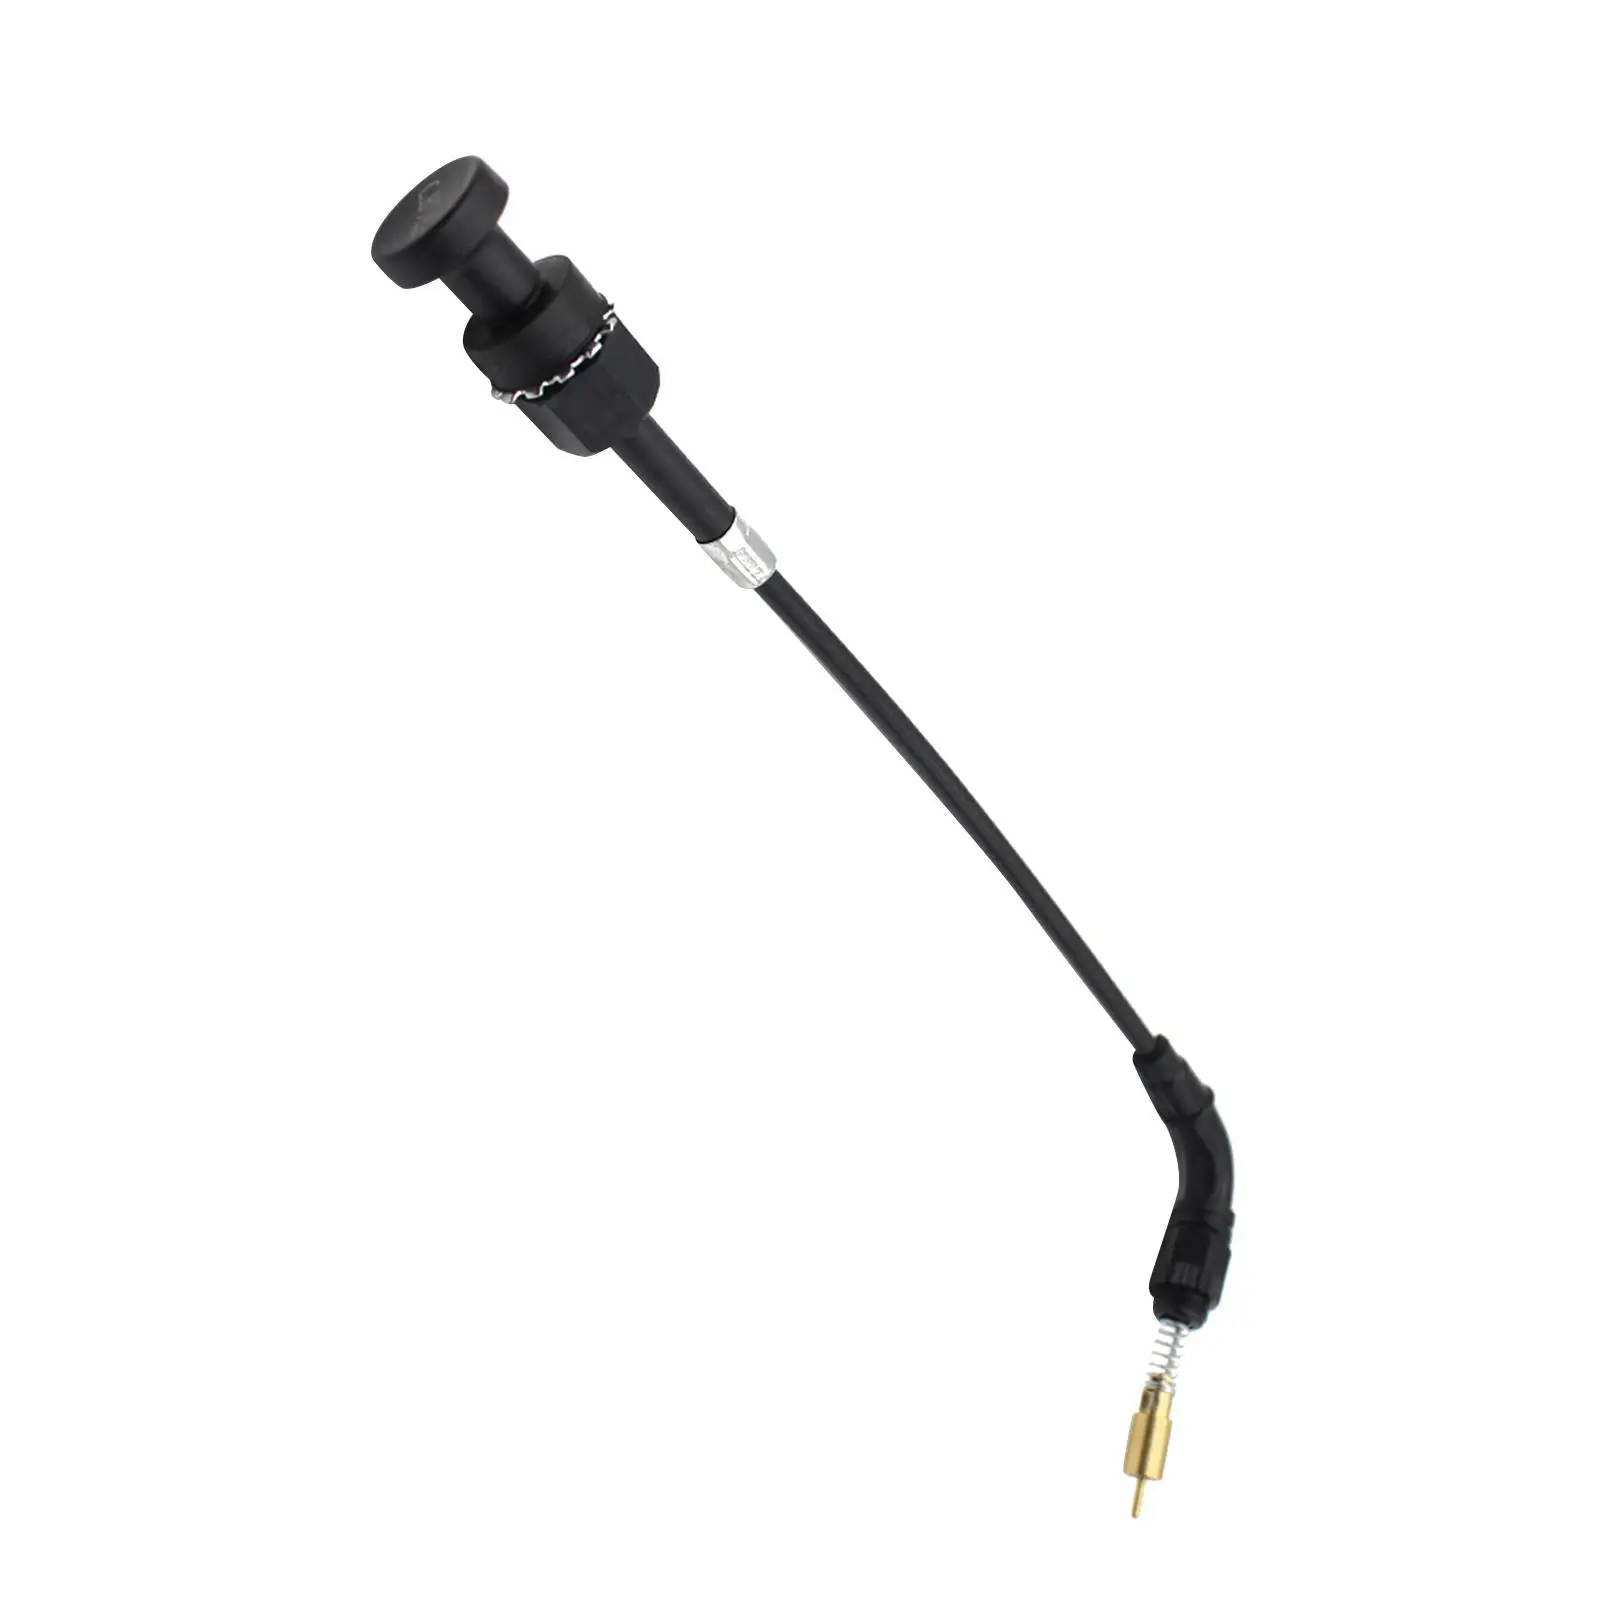 Motorcycle Carburetor Choke Cable 27421-99C for CV40 883 1200 XL883 Xlh1200 Accessories Easy Installation